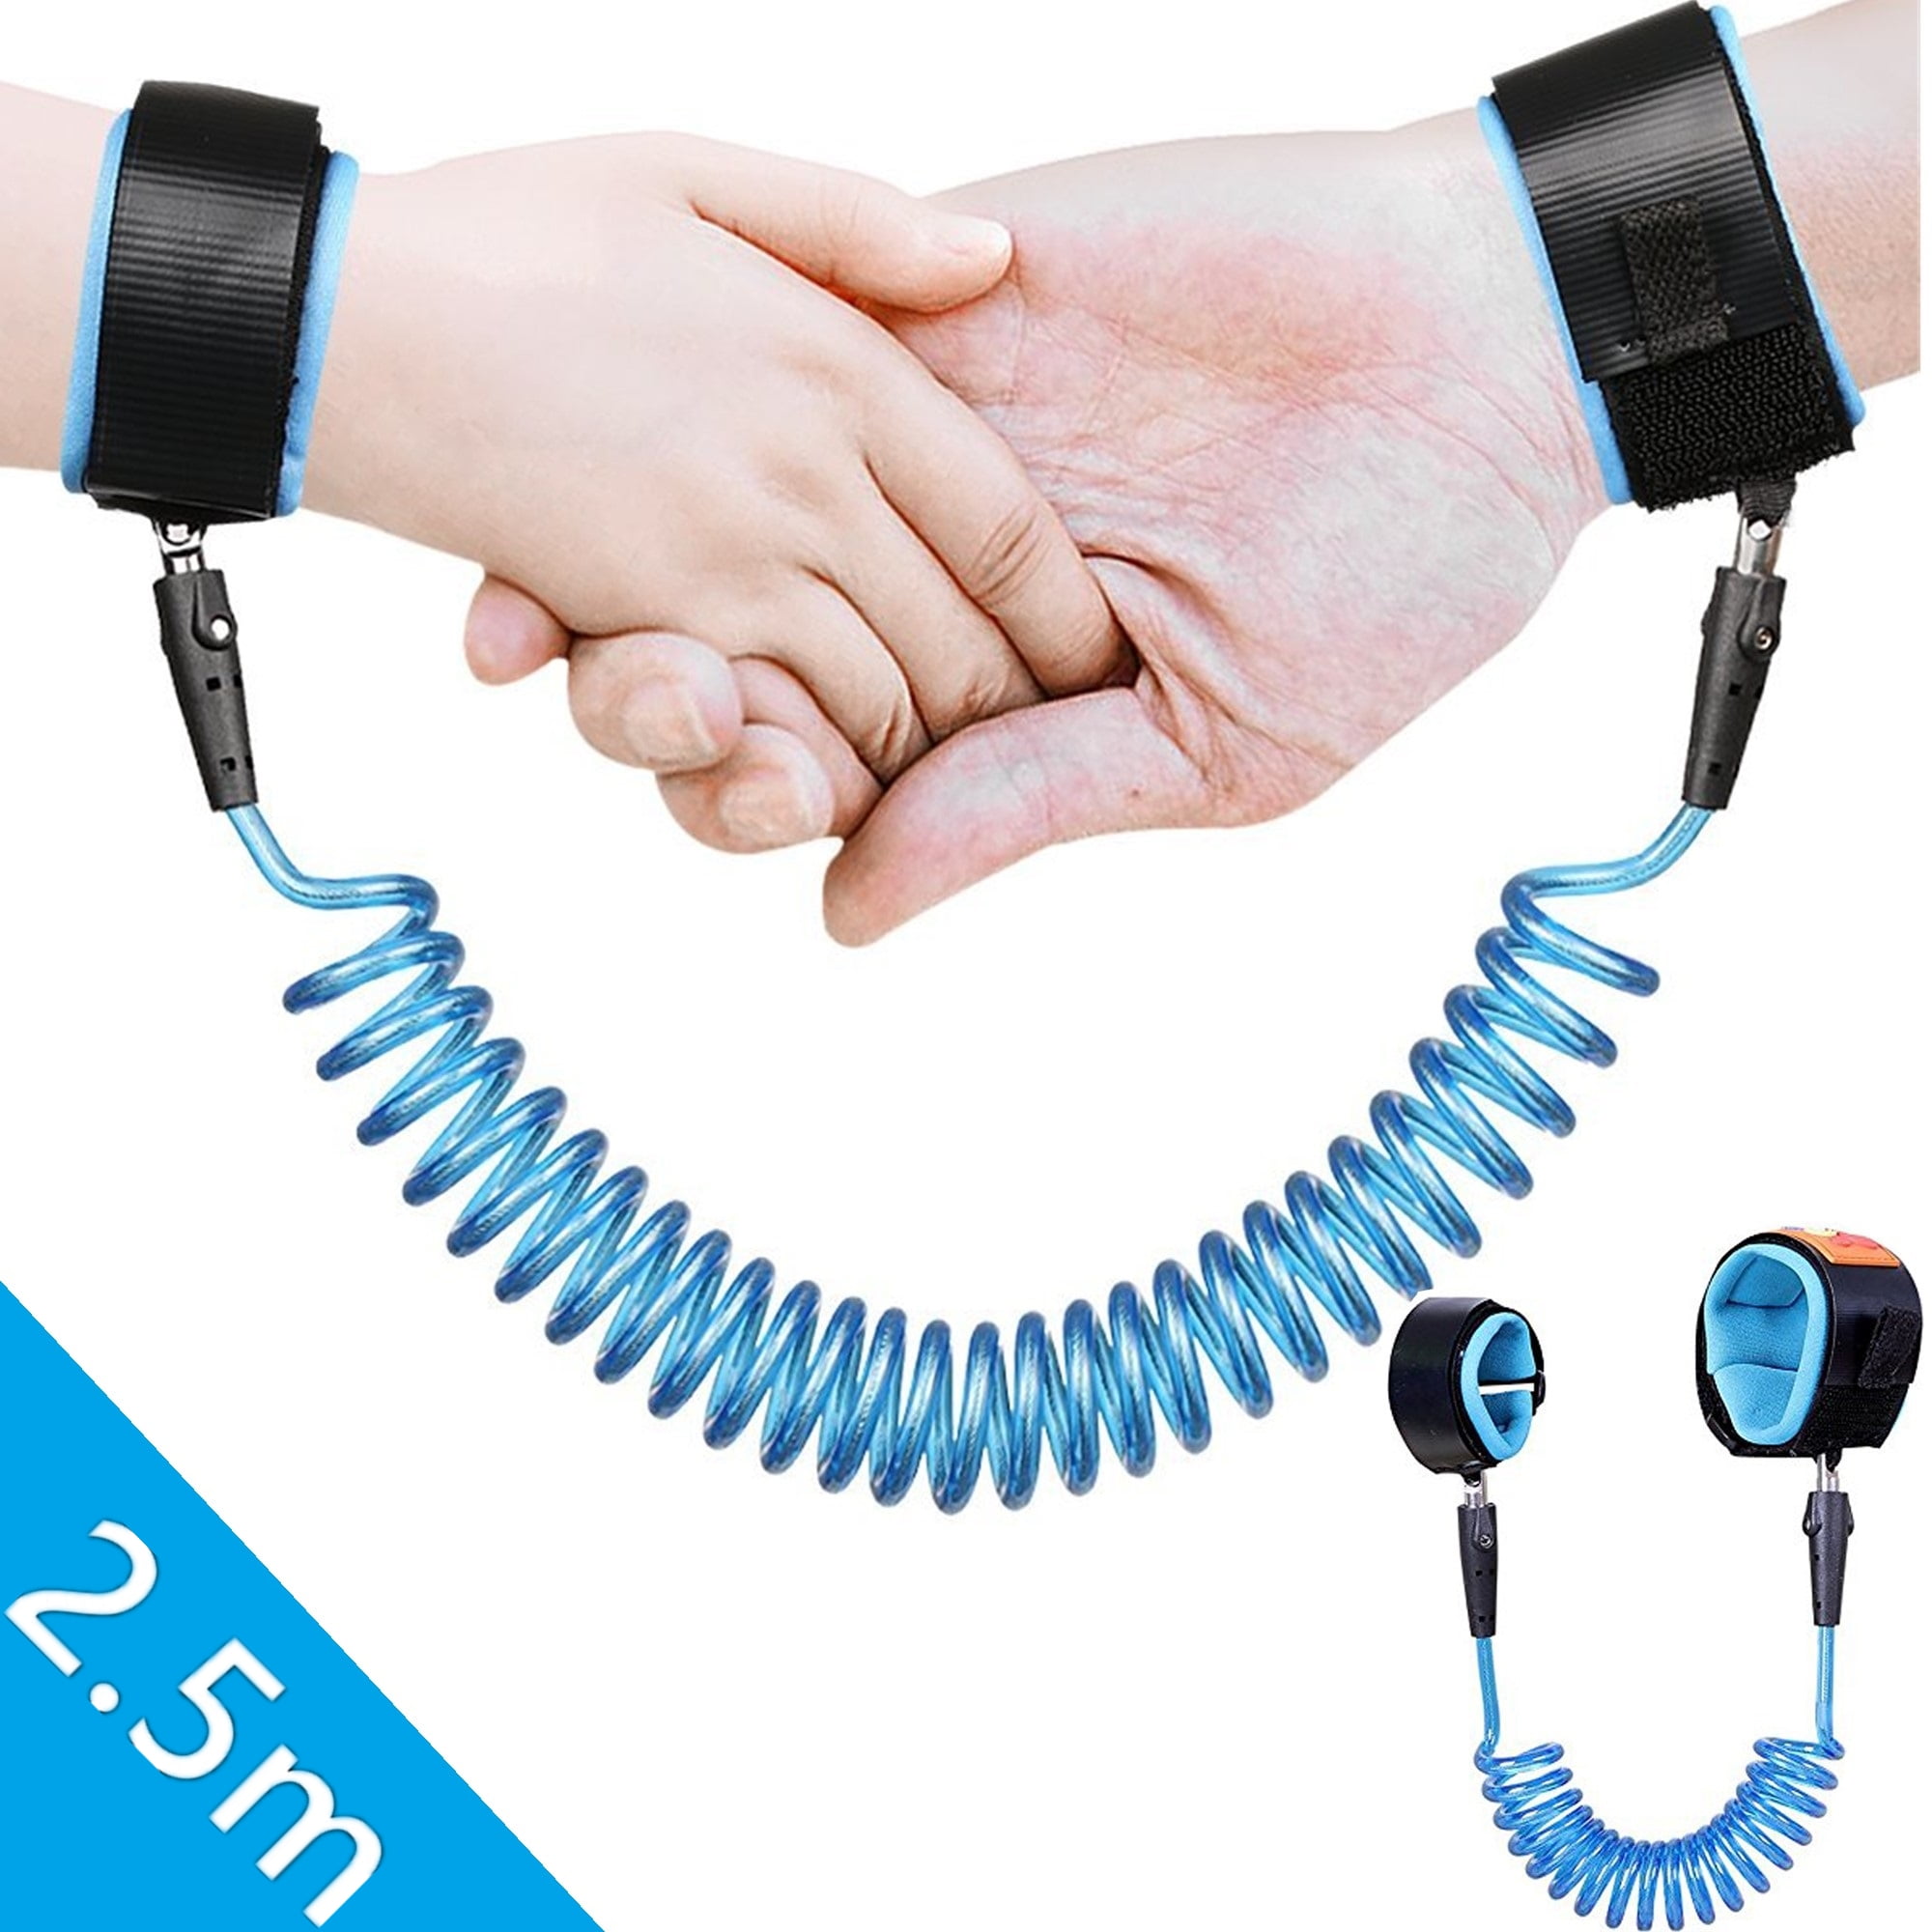 Anti-Loss Strap Wrist Link Hand Harness Leash band Safety for Toddlers Child Kid 